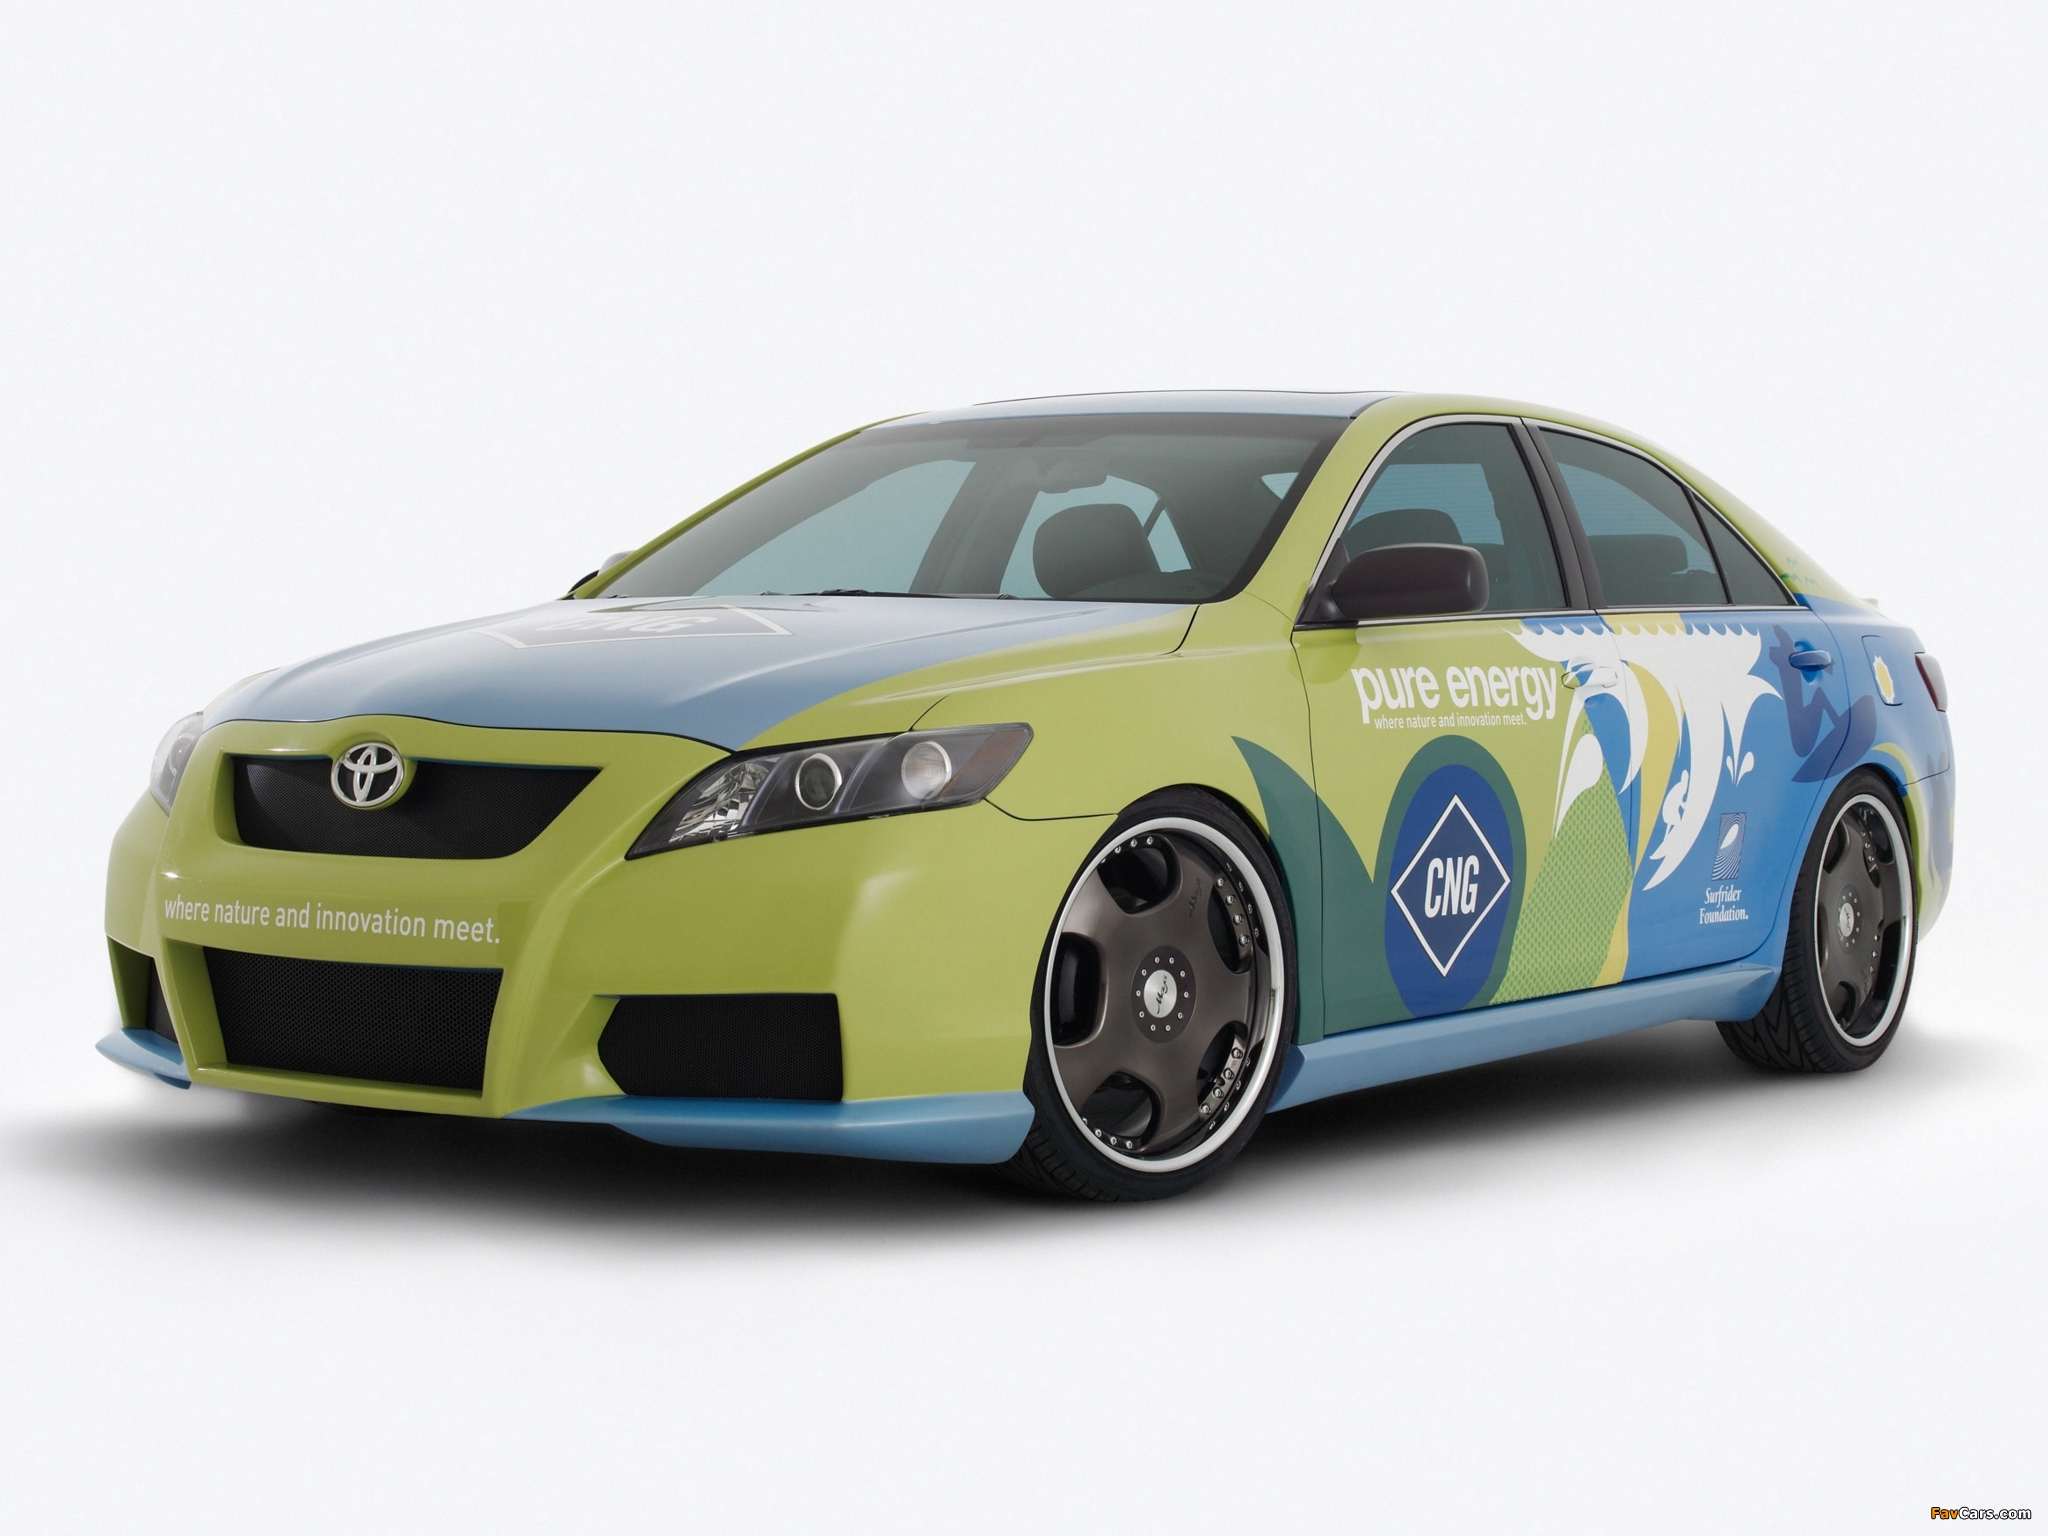 Toyota Surfrider Camry CNG Hybrid Concept 2009 pictures (2048 x 1536)